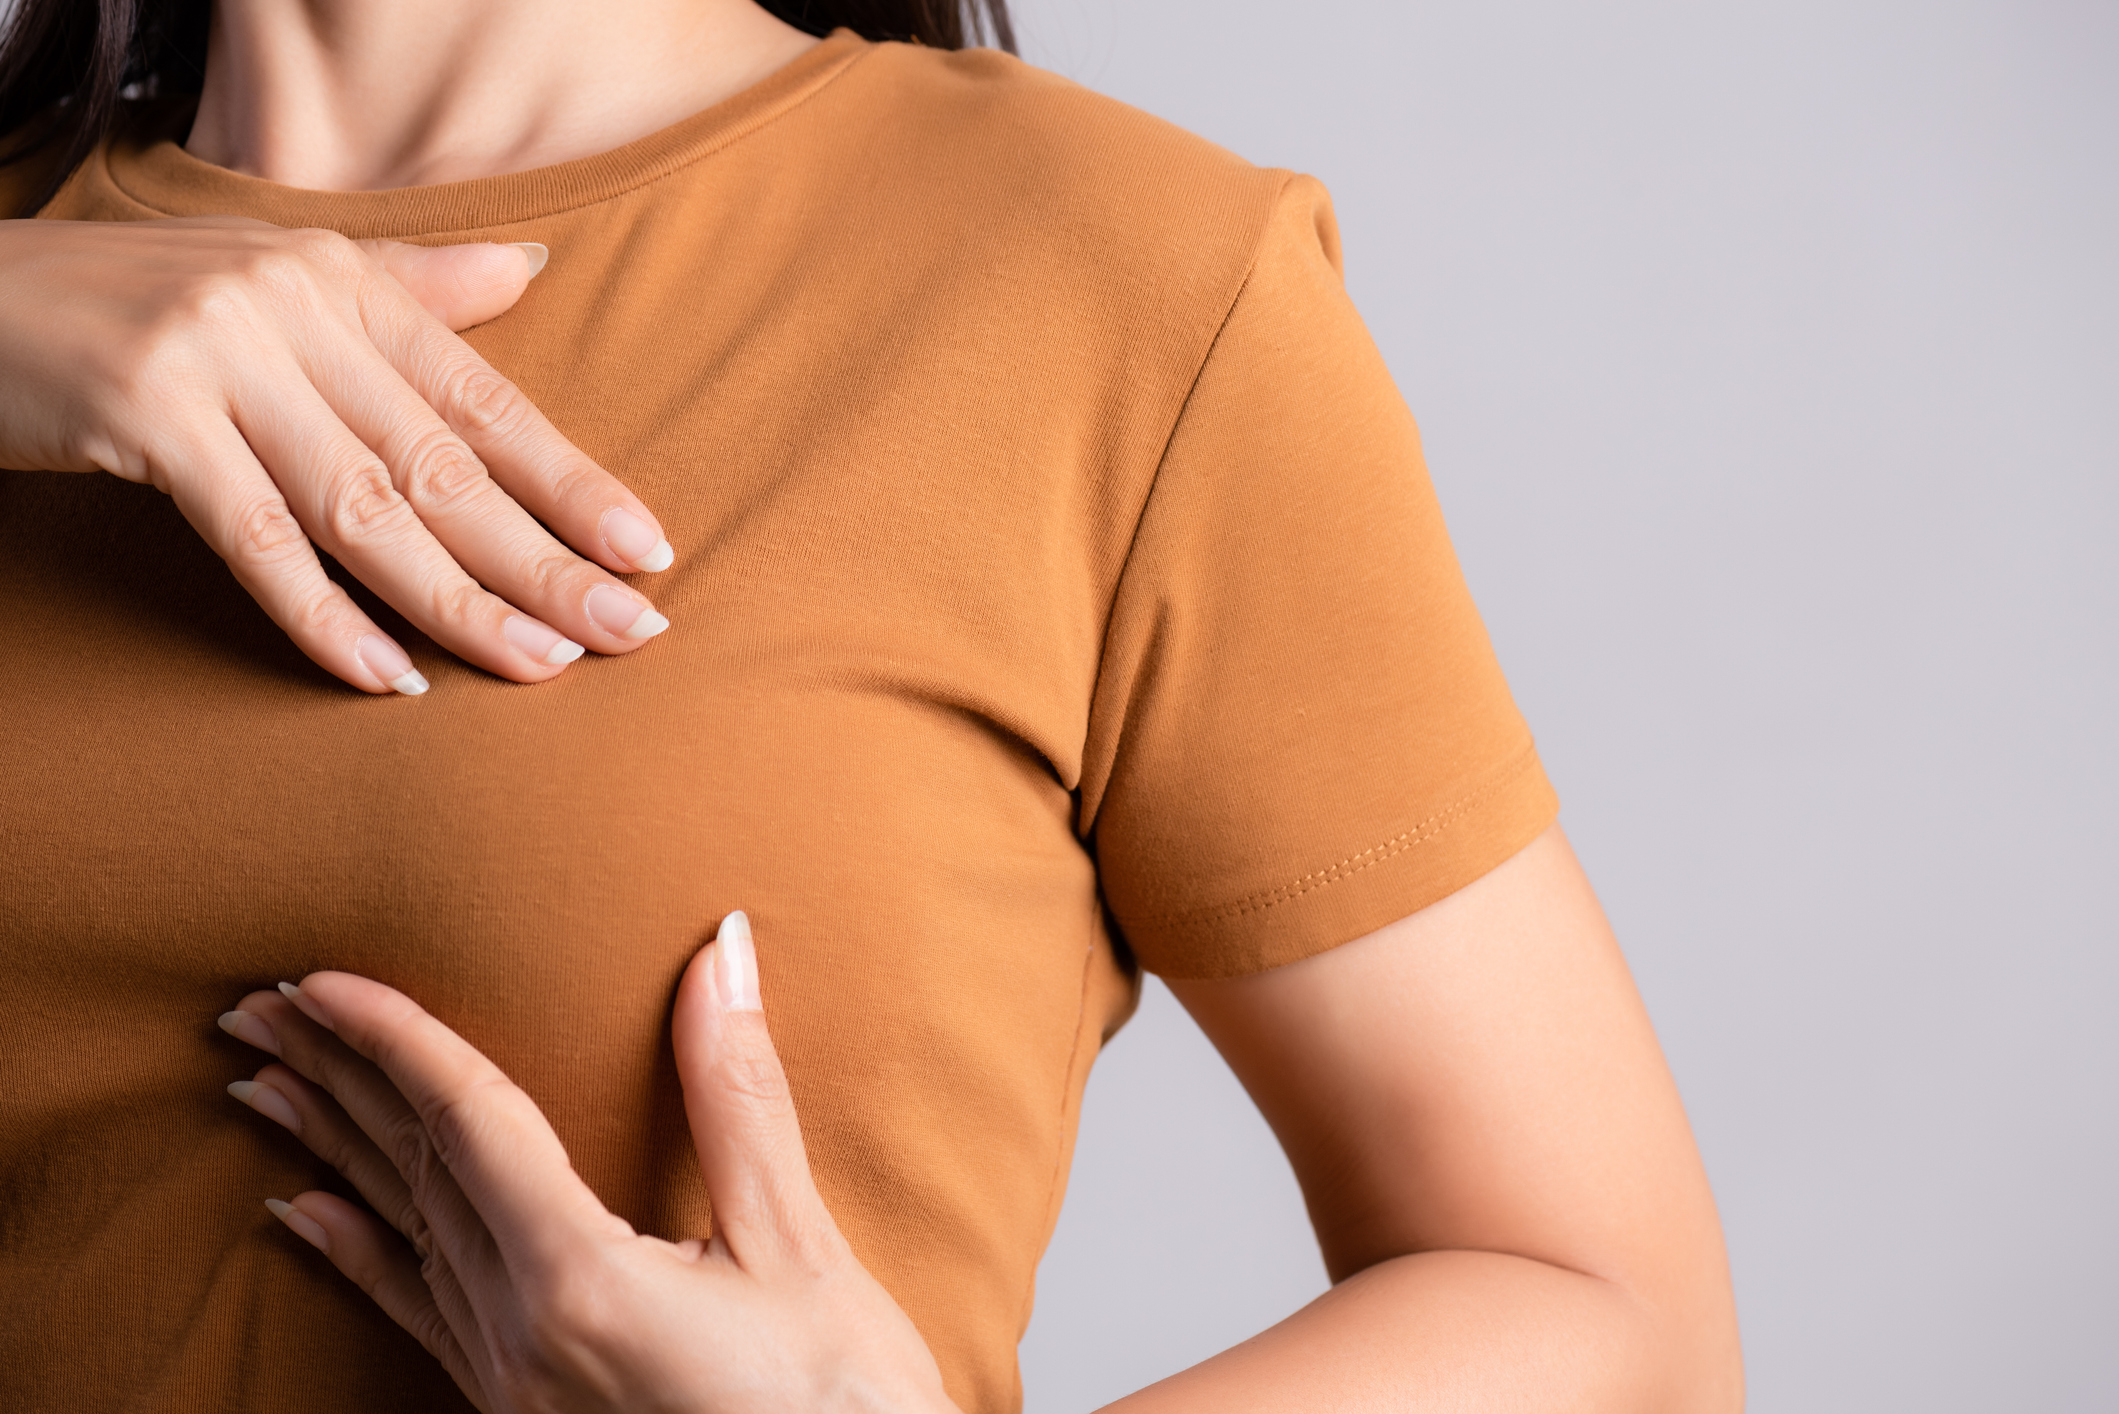 My Breast is Tender, But I Don't Feel a Lump – Am I Normal?